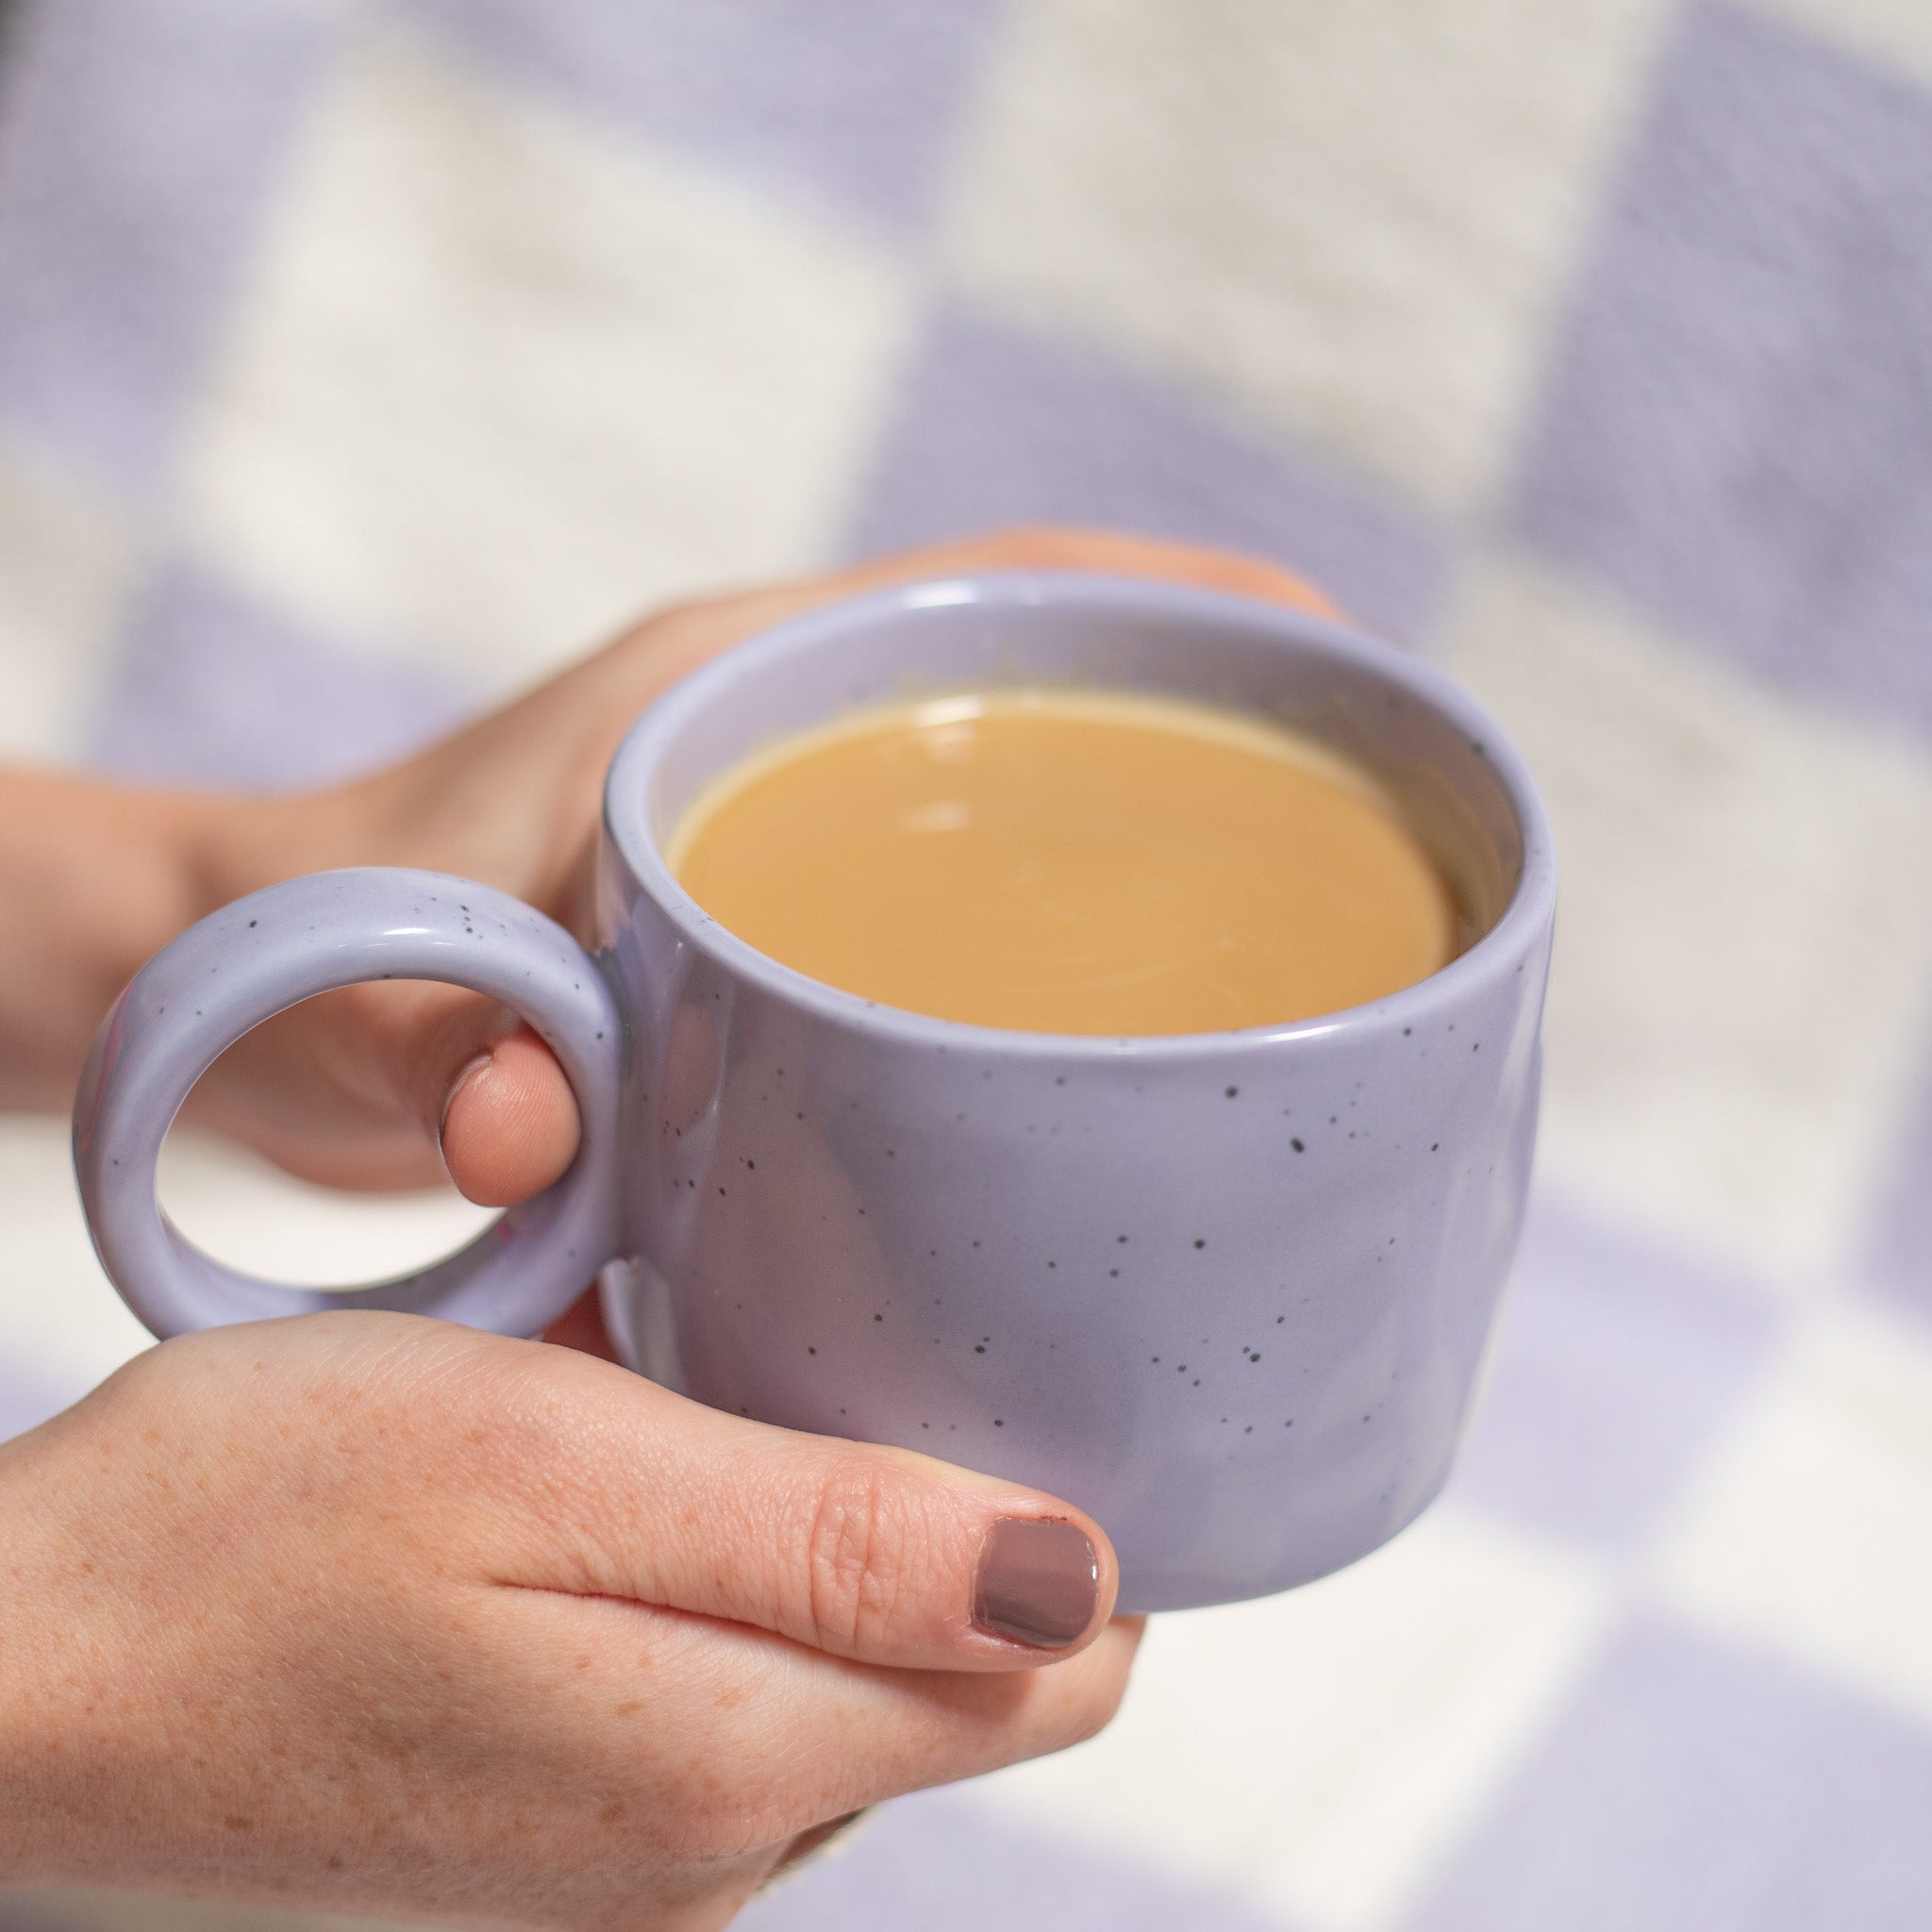 A woman&#39;s hands holding a Purple Speckled Nordic Mug over a purple and white checkered plush blanket.